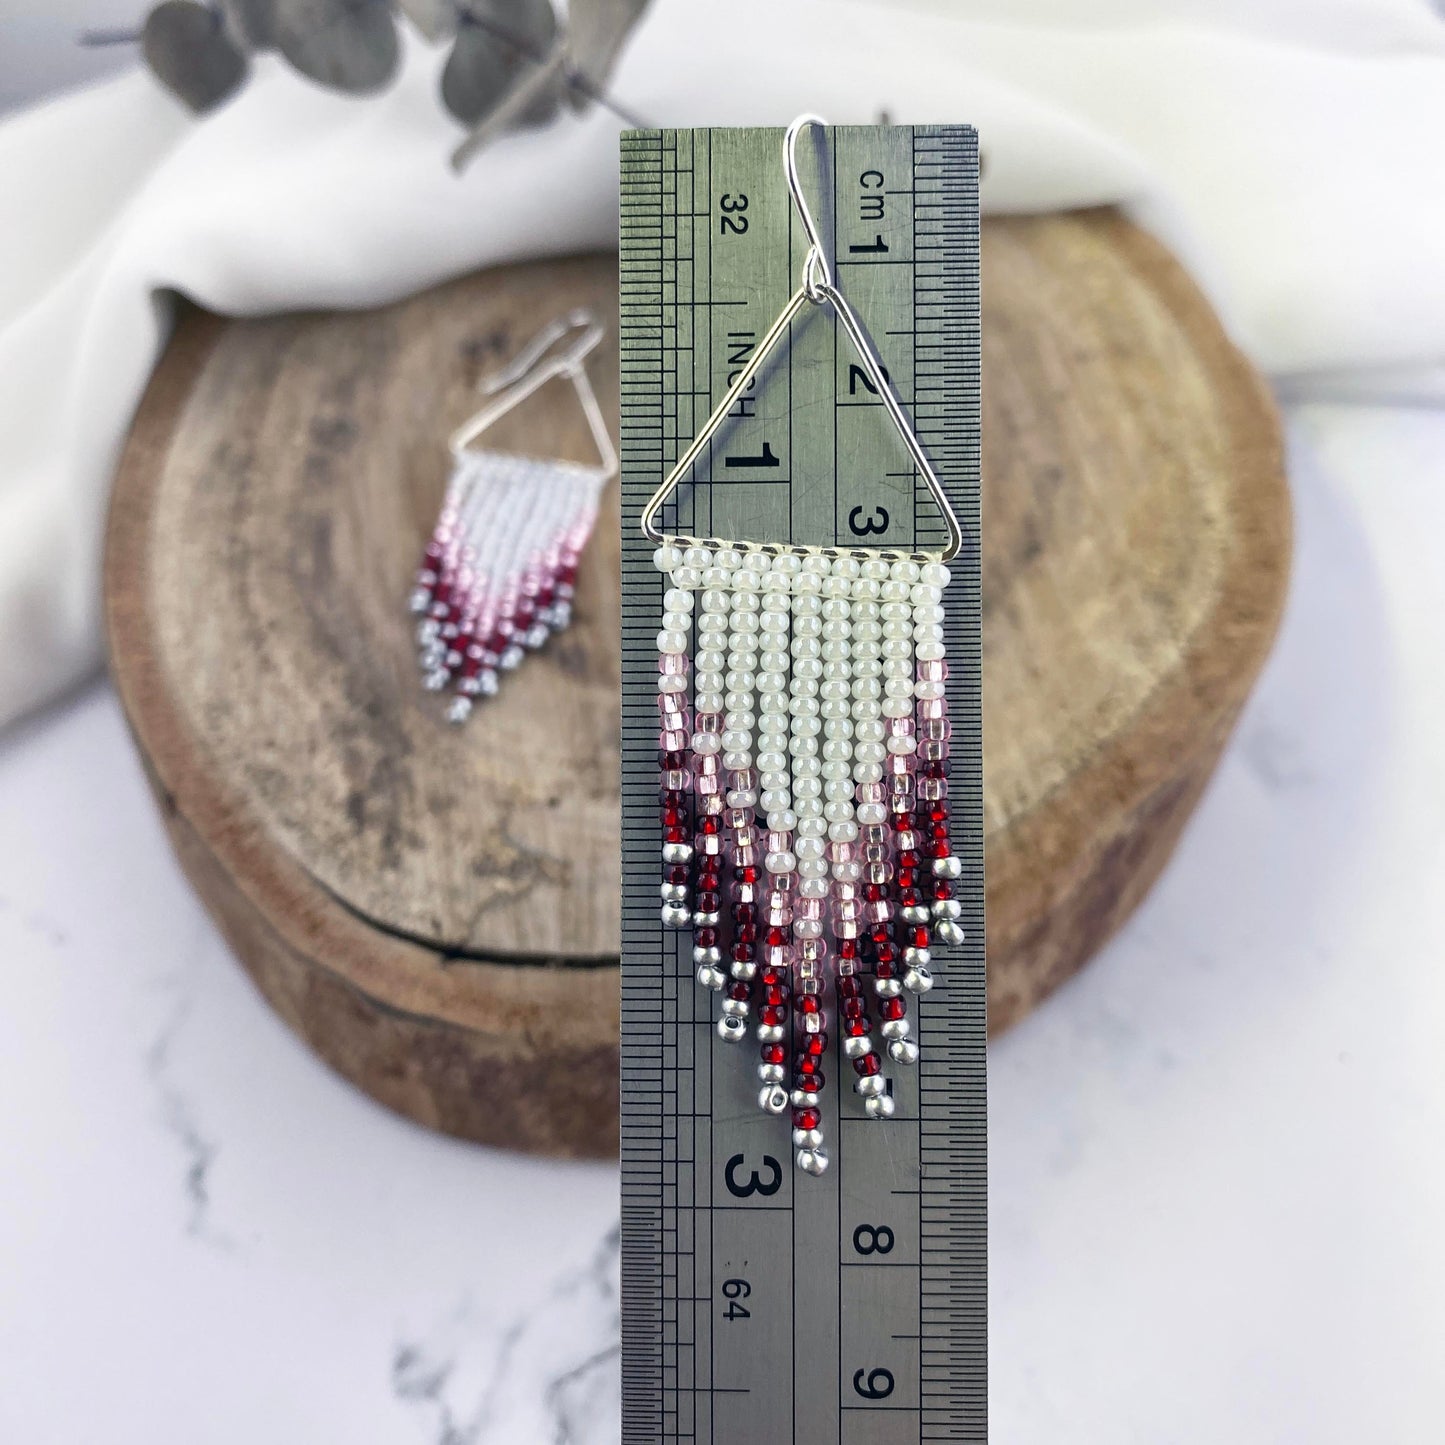 Silver Triangle with White, Pink & Red Beaded Fringe Earrings